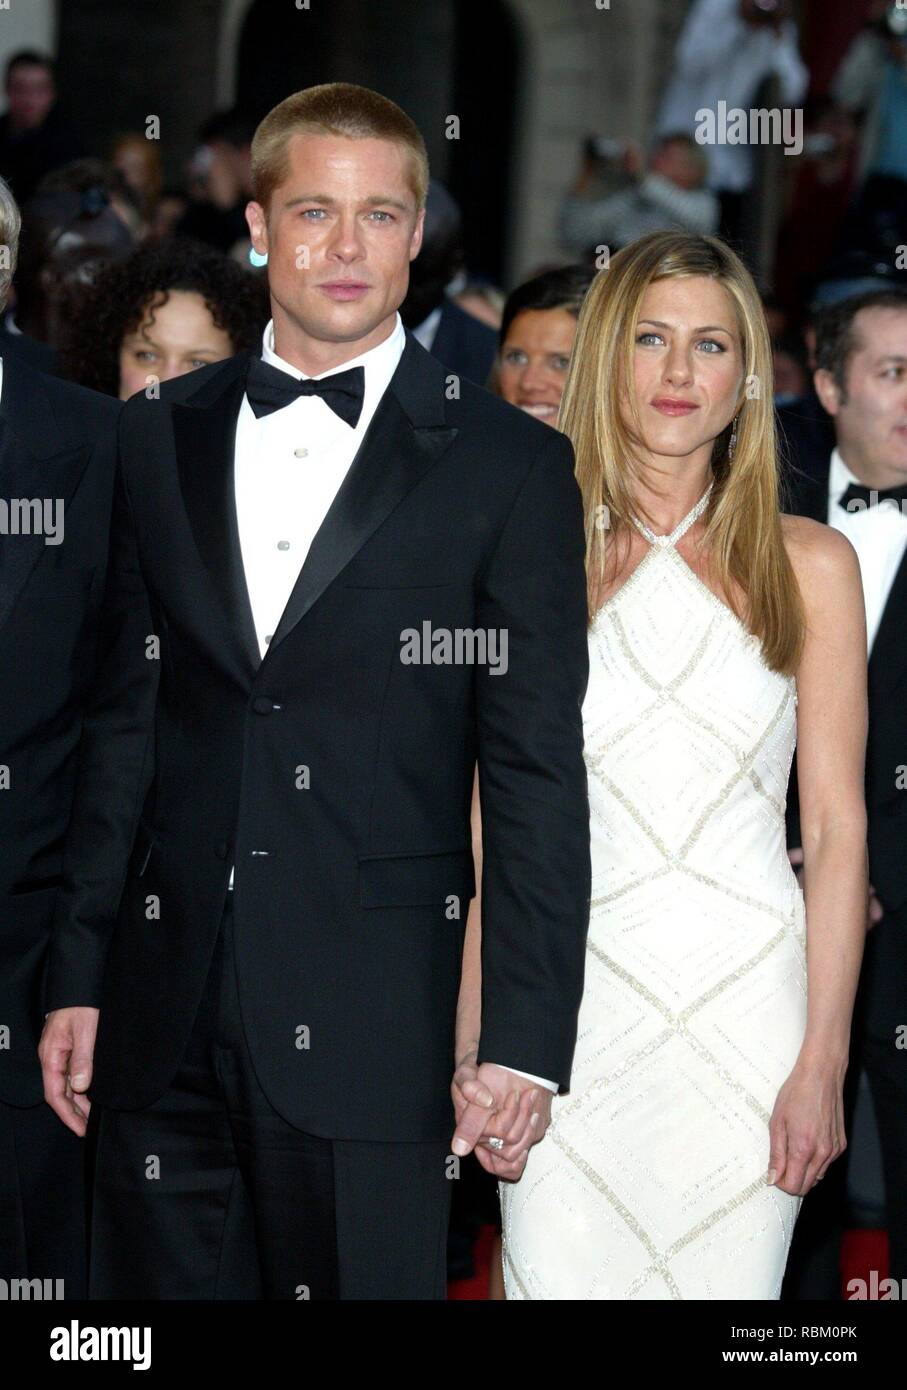 Cannes, France. 13th May, 2004. (dpa) - Hollywood star Brad Pitt and his wife Jennifer Aniston pose and hold hands upon their arrival at the presentation of Pitt's new movie 'Troy' at the 57th Film Festival in Cannes, France, 13 May 2004. In the movie Pitt stars as Greek hero Achilles. | usage worldwide Credit: dpa/Alamy Live News Stock Photo